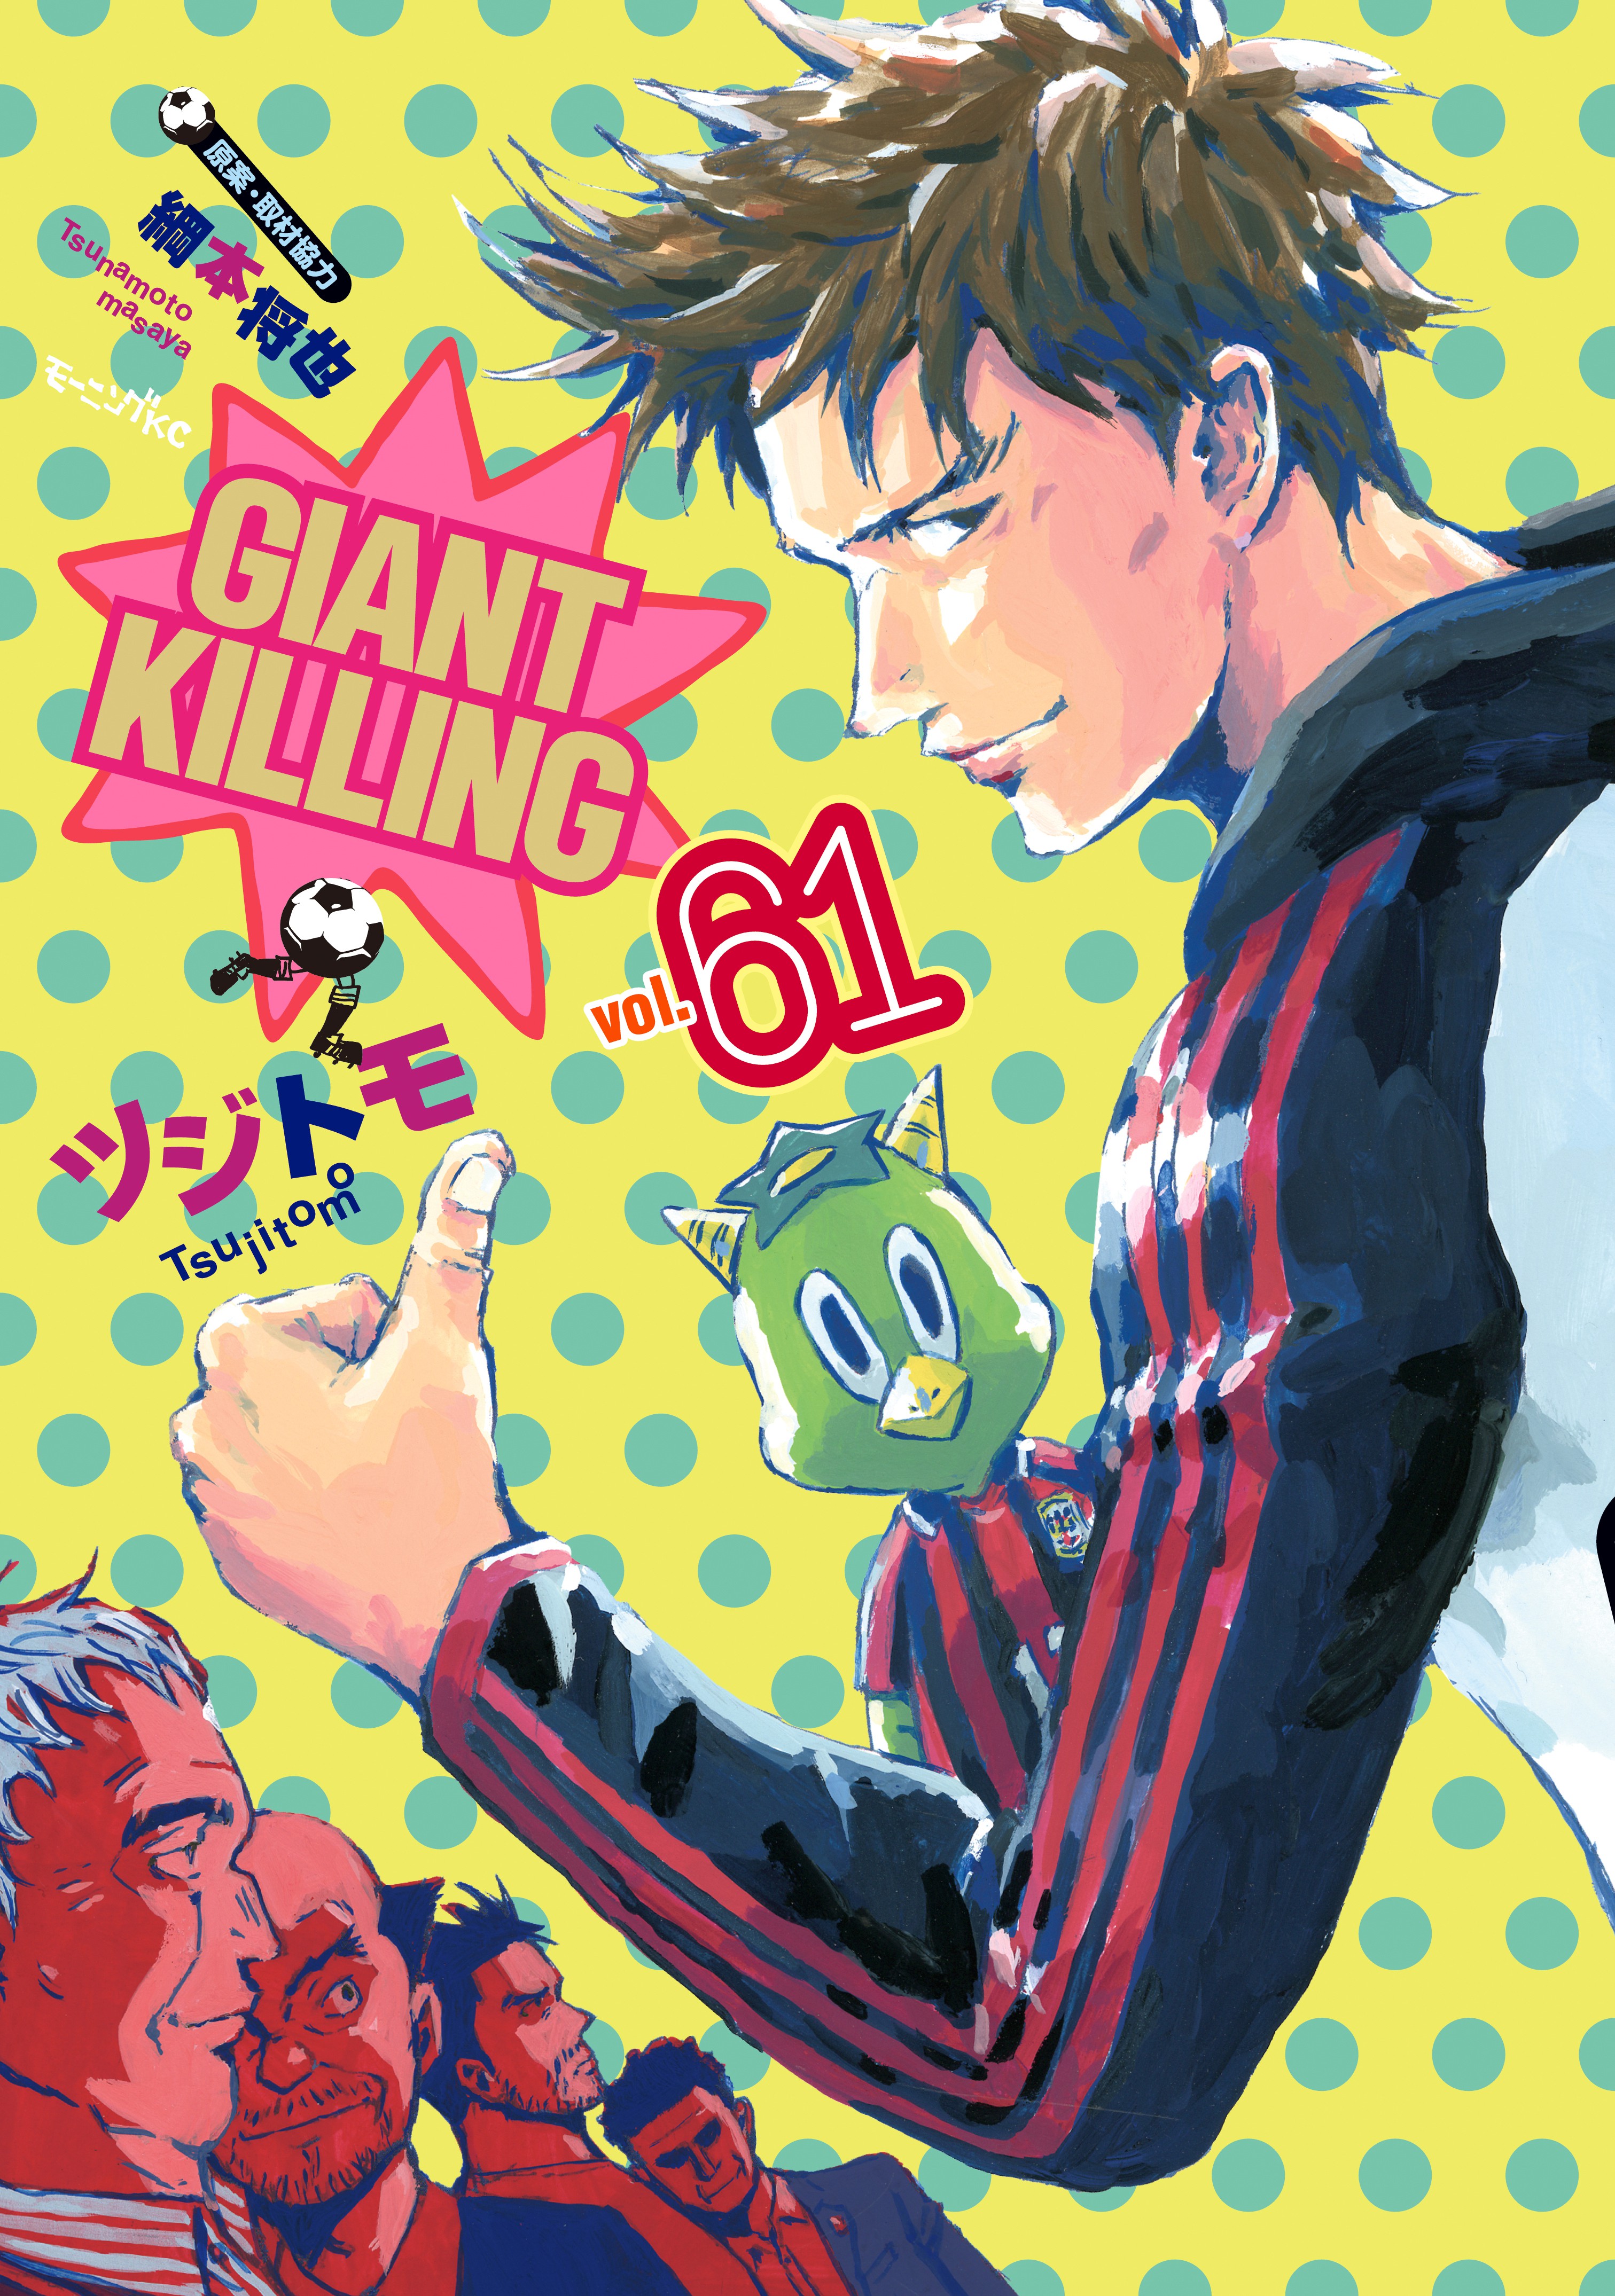 Giant killing capitulo 24, By Giant killing